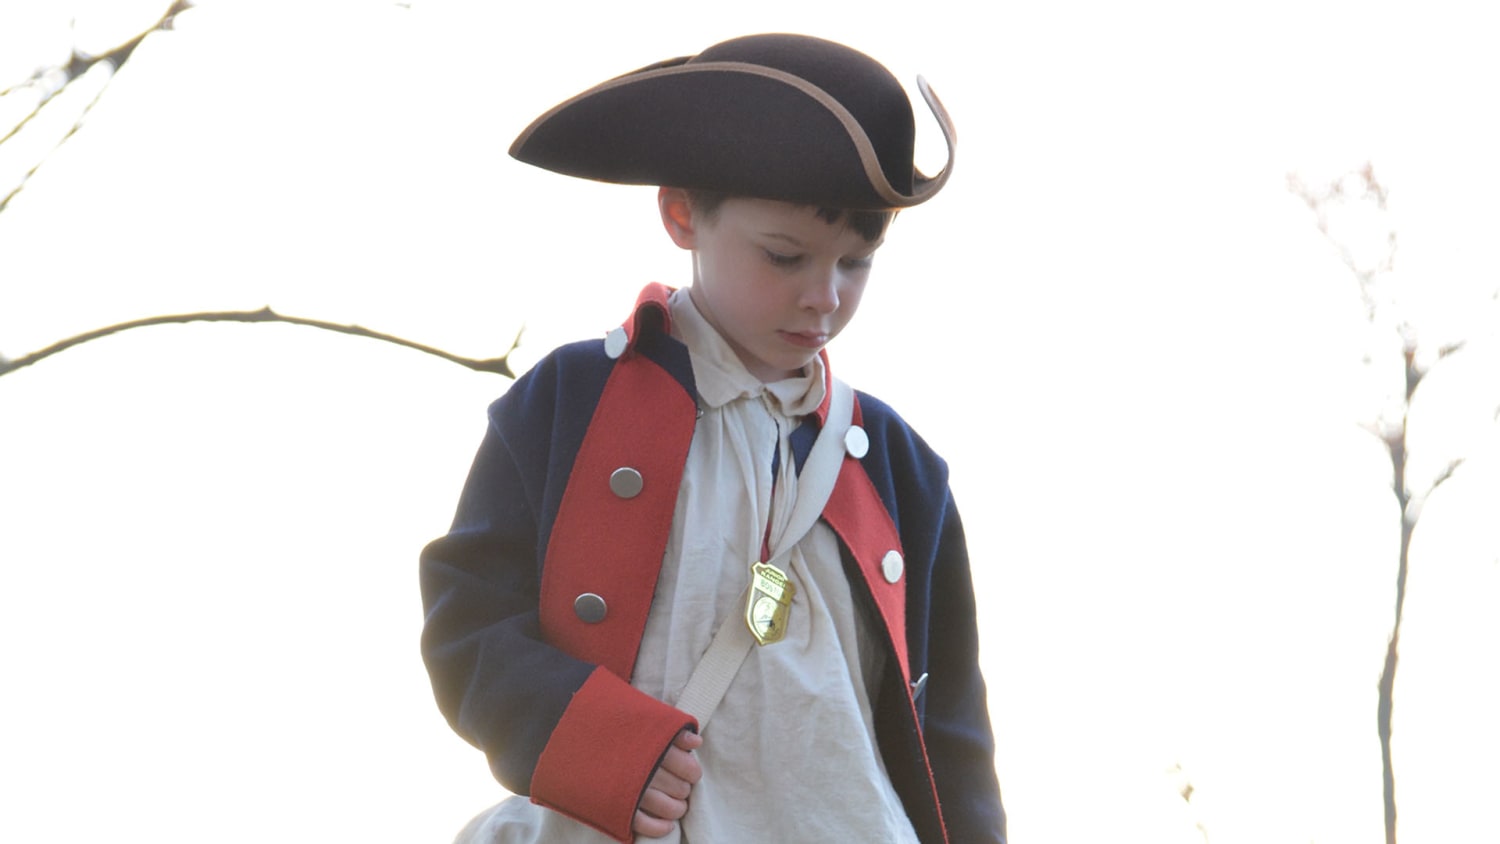 american revolution pictures for kids